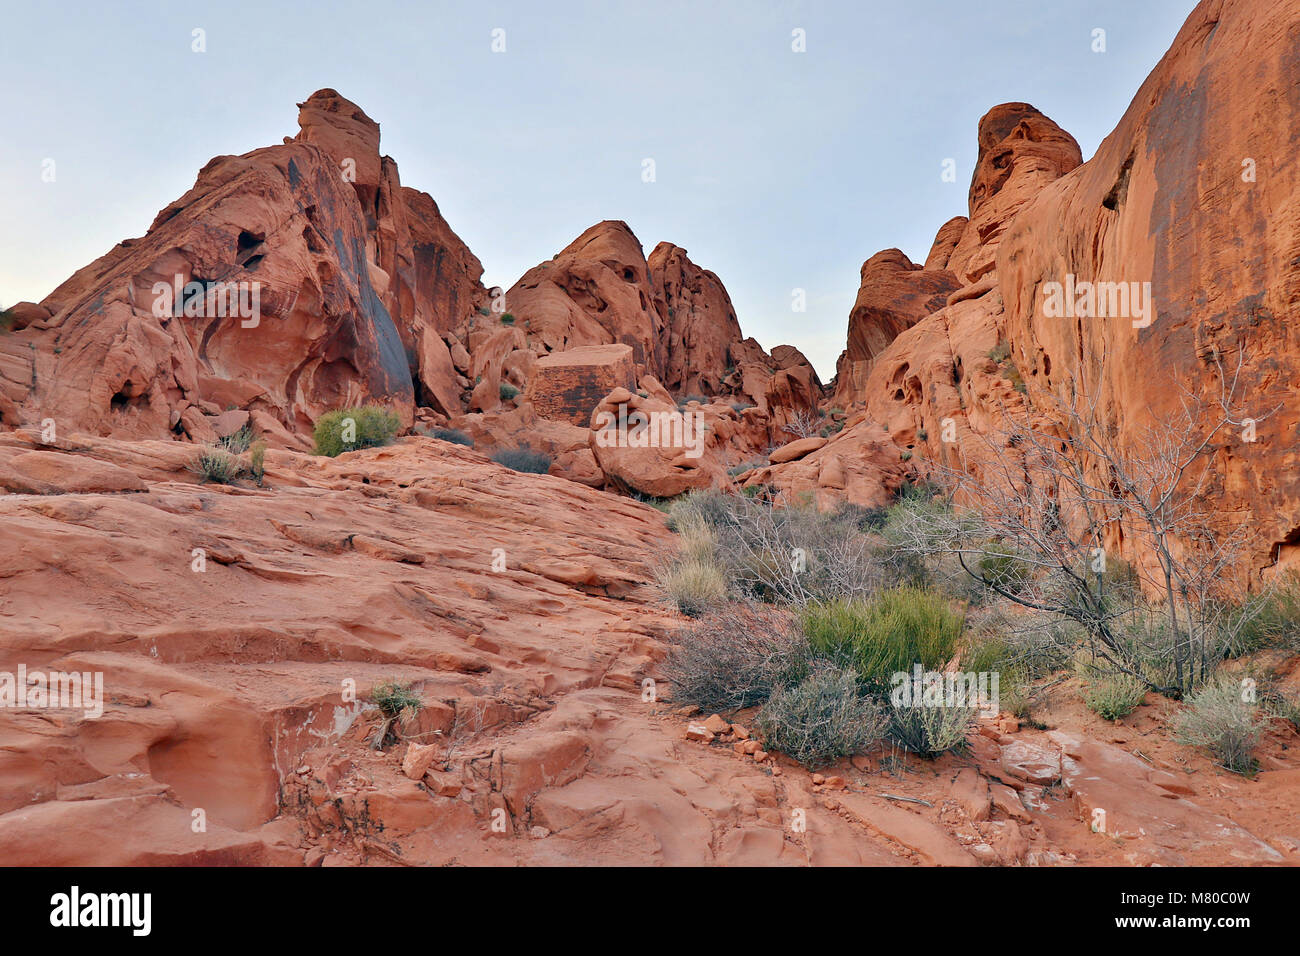 Ancient red rock formations in the Valley of Fire State Park in the desert outside Las Vegas, Nevada. Stock Photo